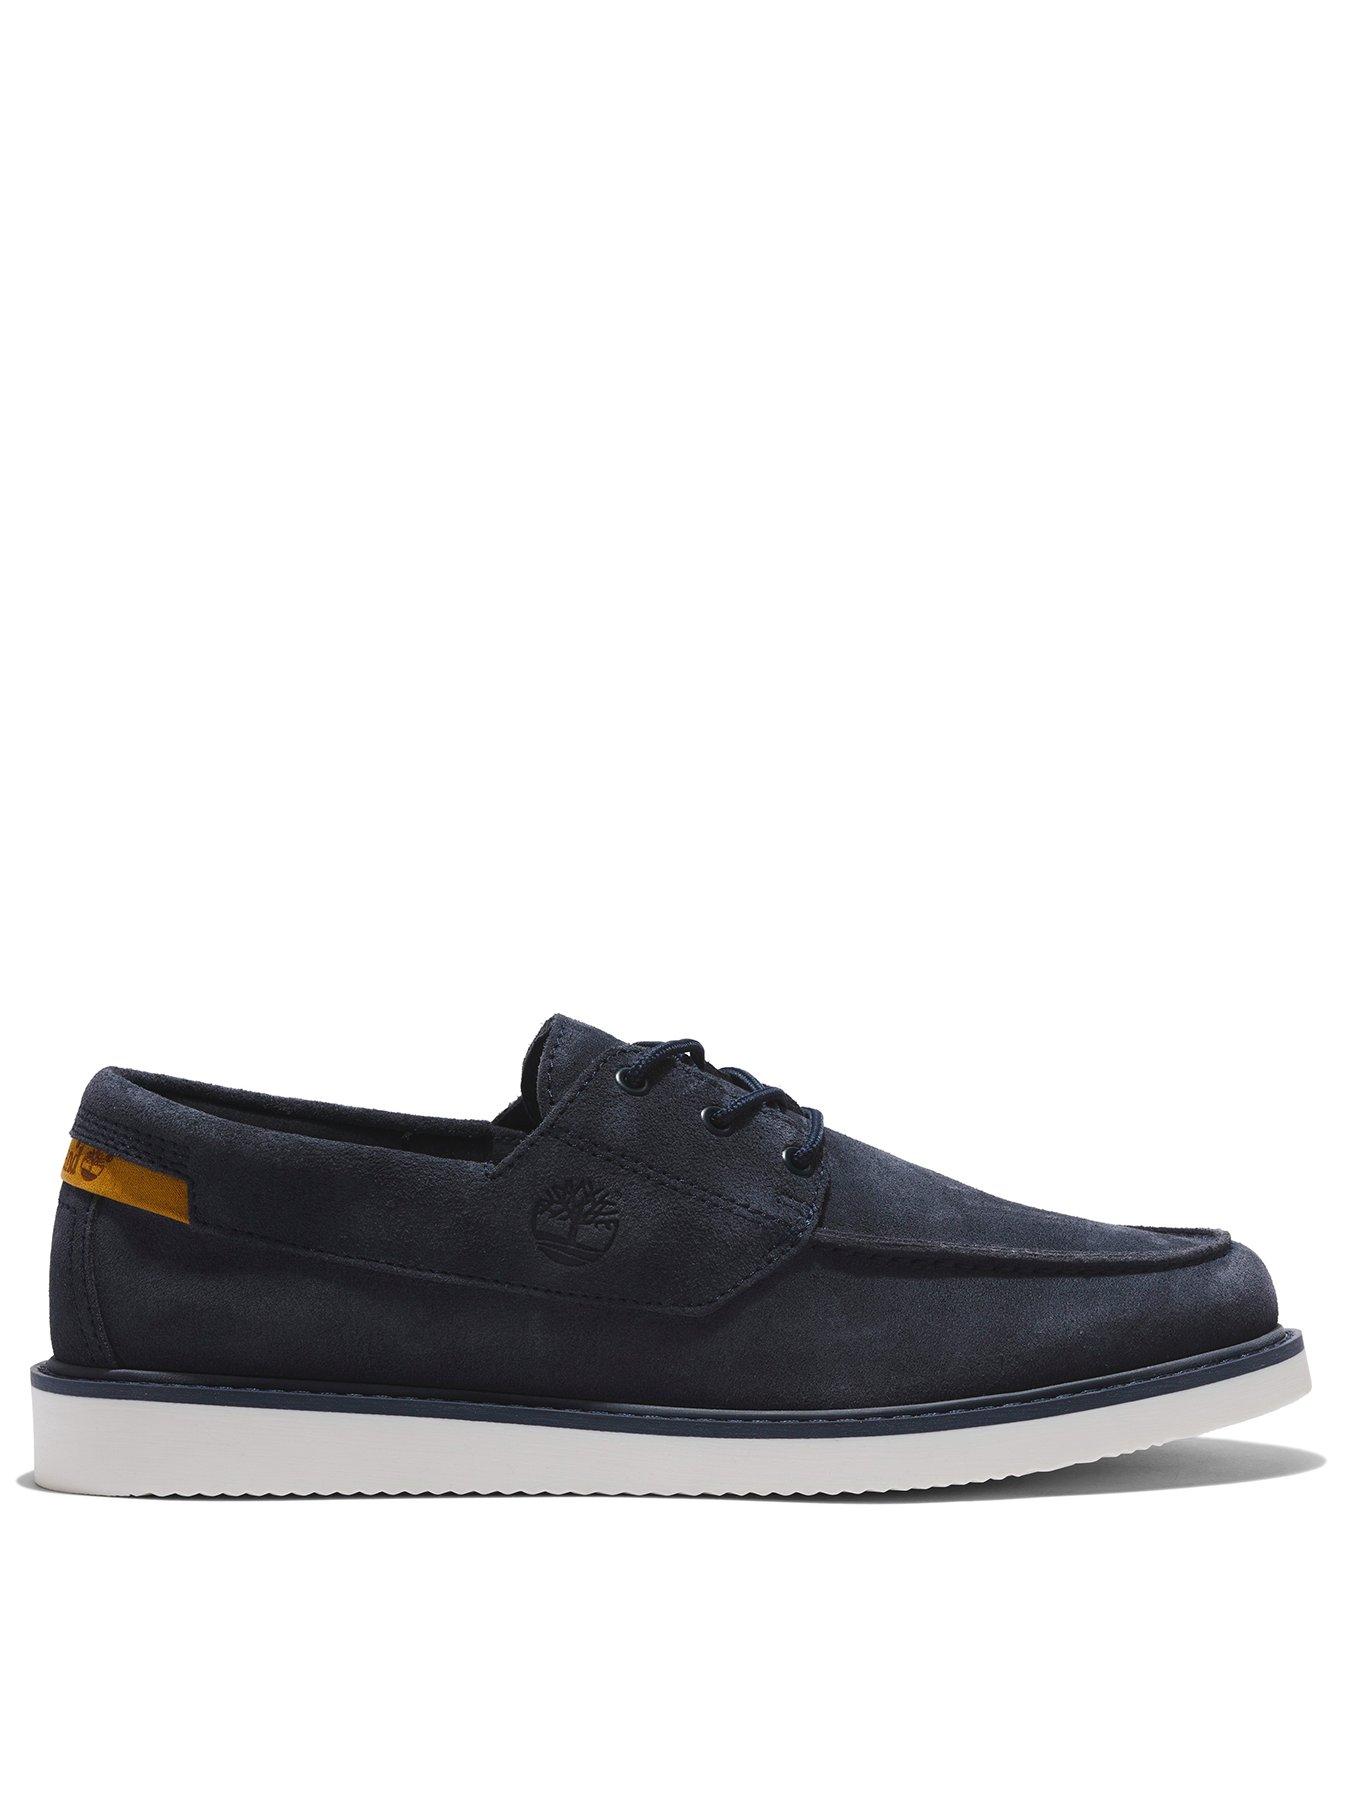 Timberland Newmarket Il Leather Boat Shoe - Navy | very.co.uk